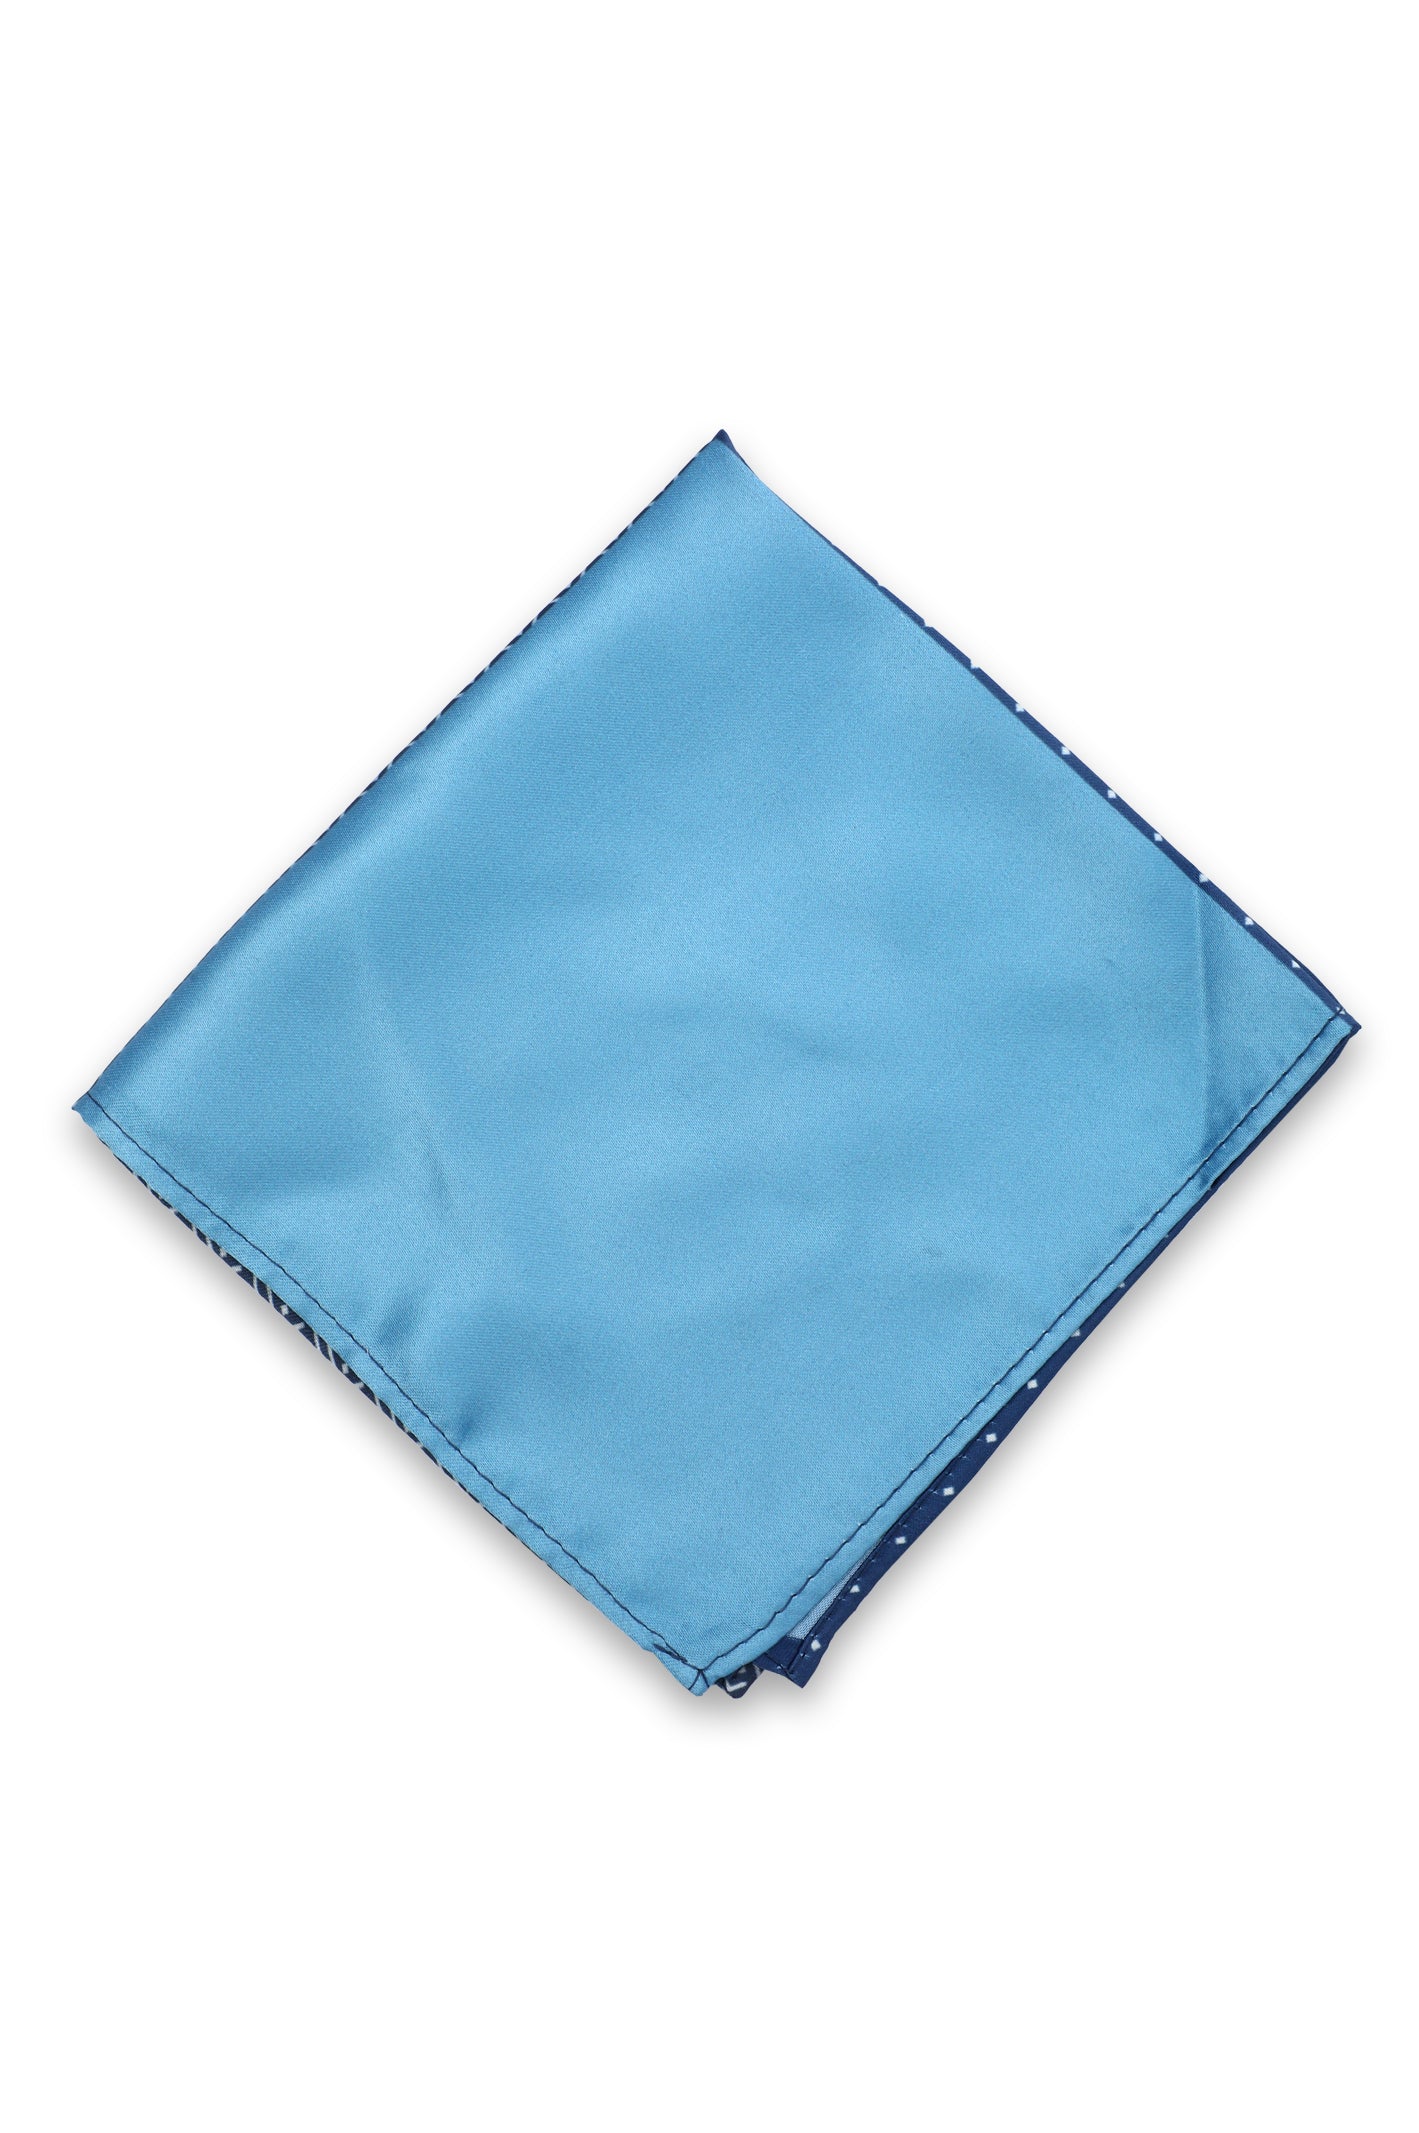 :ight Pocket Squares (Four Sided)